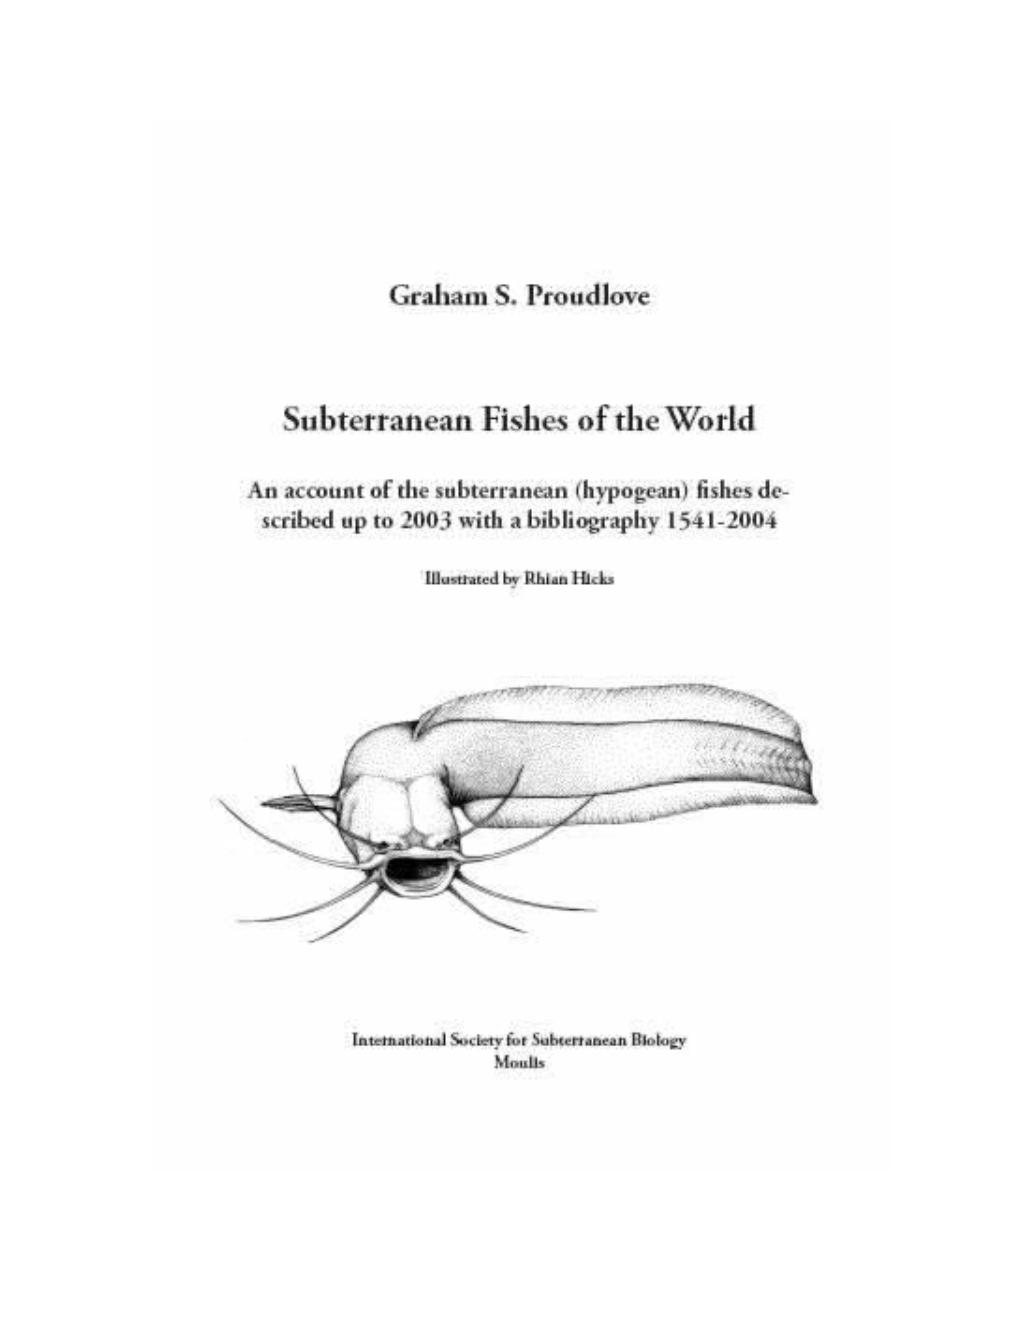 Announcing a Major New Book on the Subterranean Fishes of the World